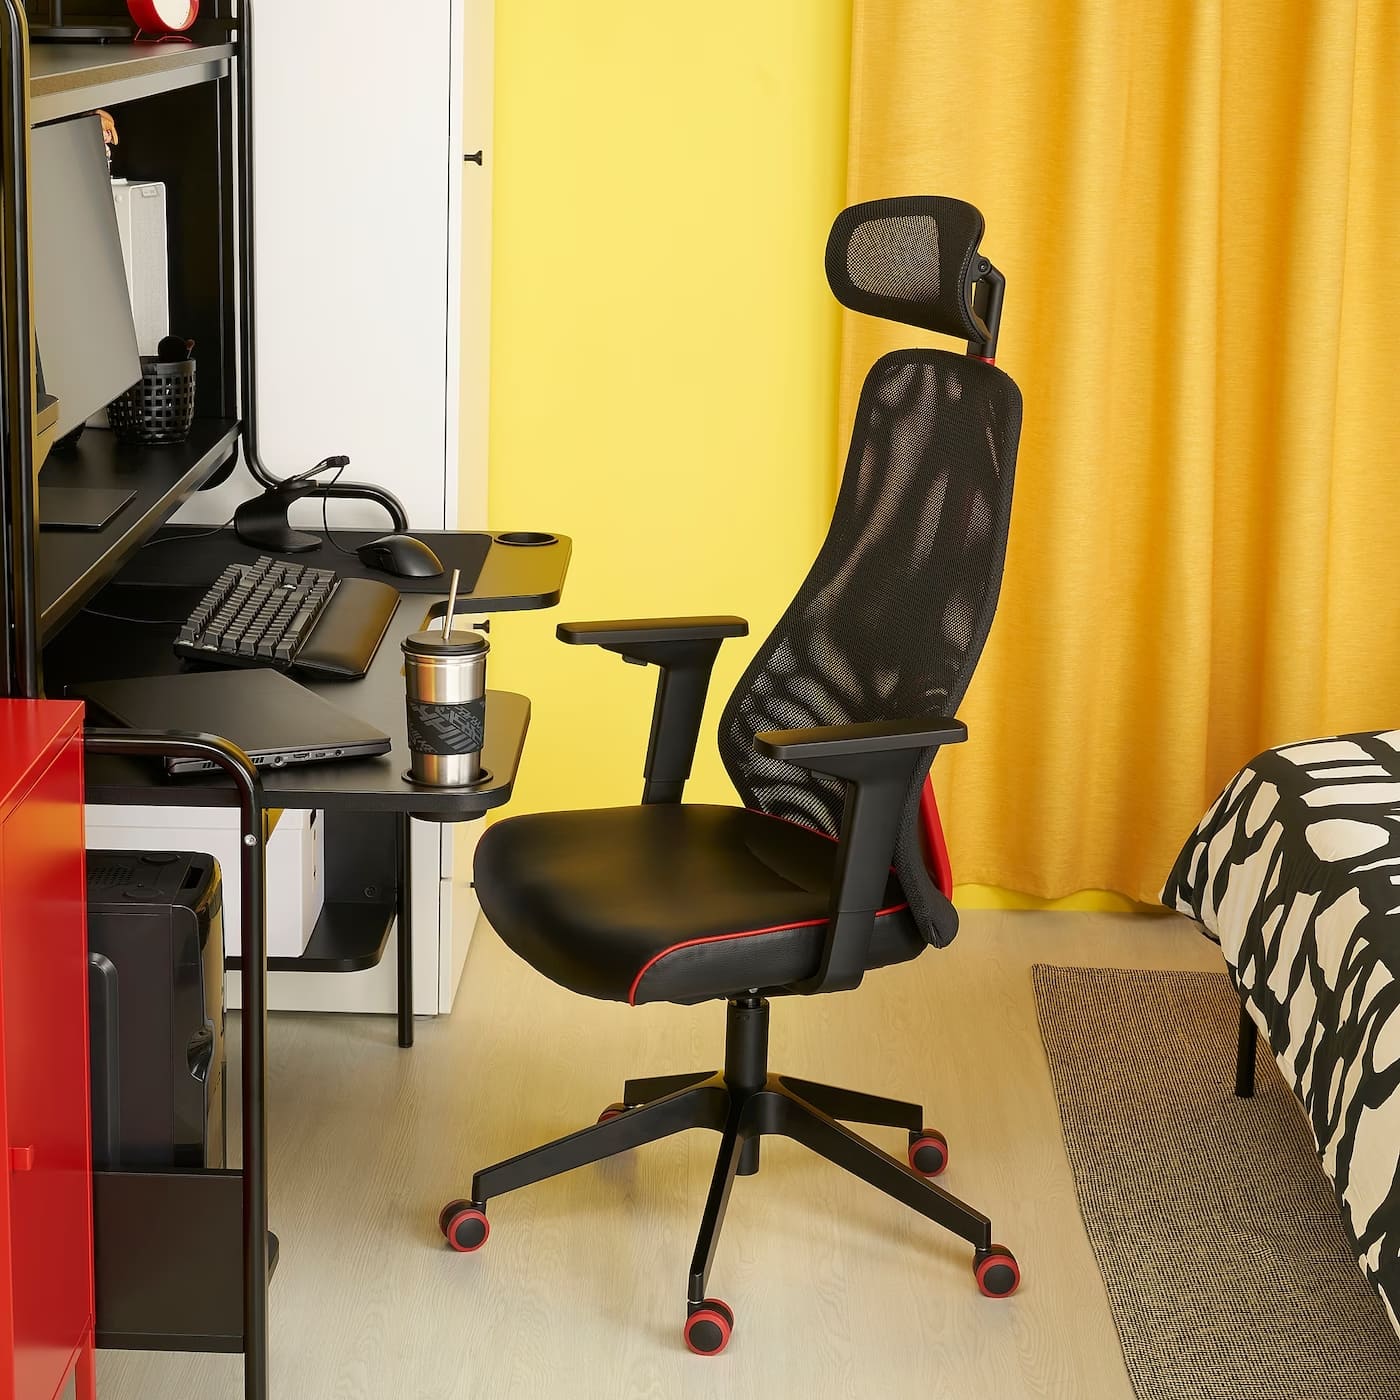 Gaming room MATCHSPEL Gaming Chair